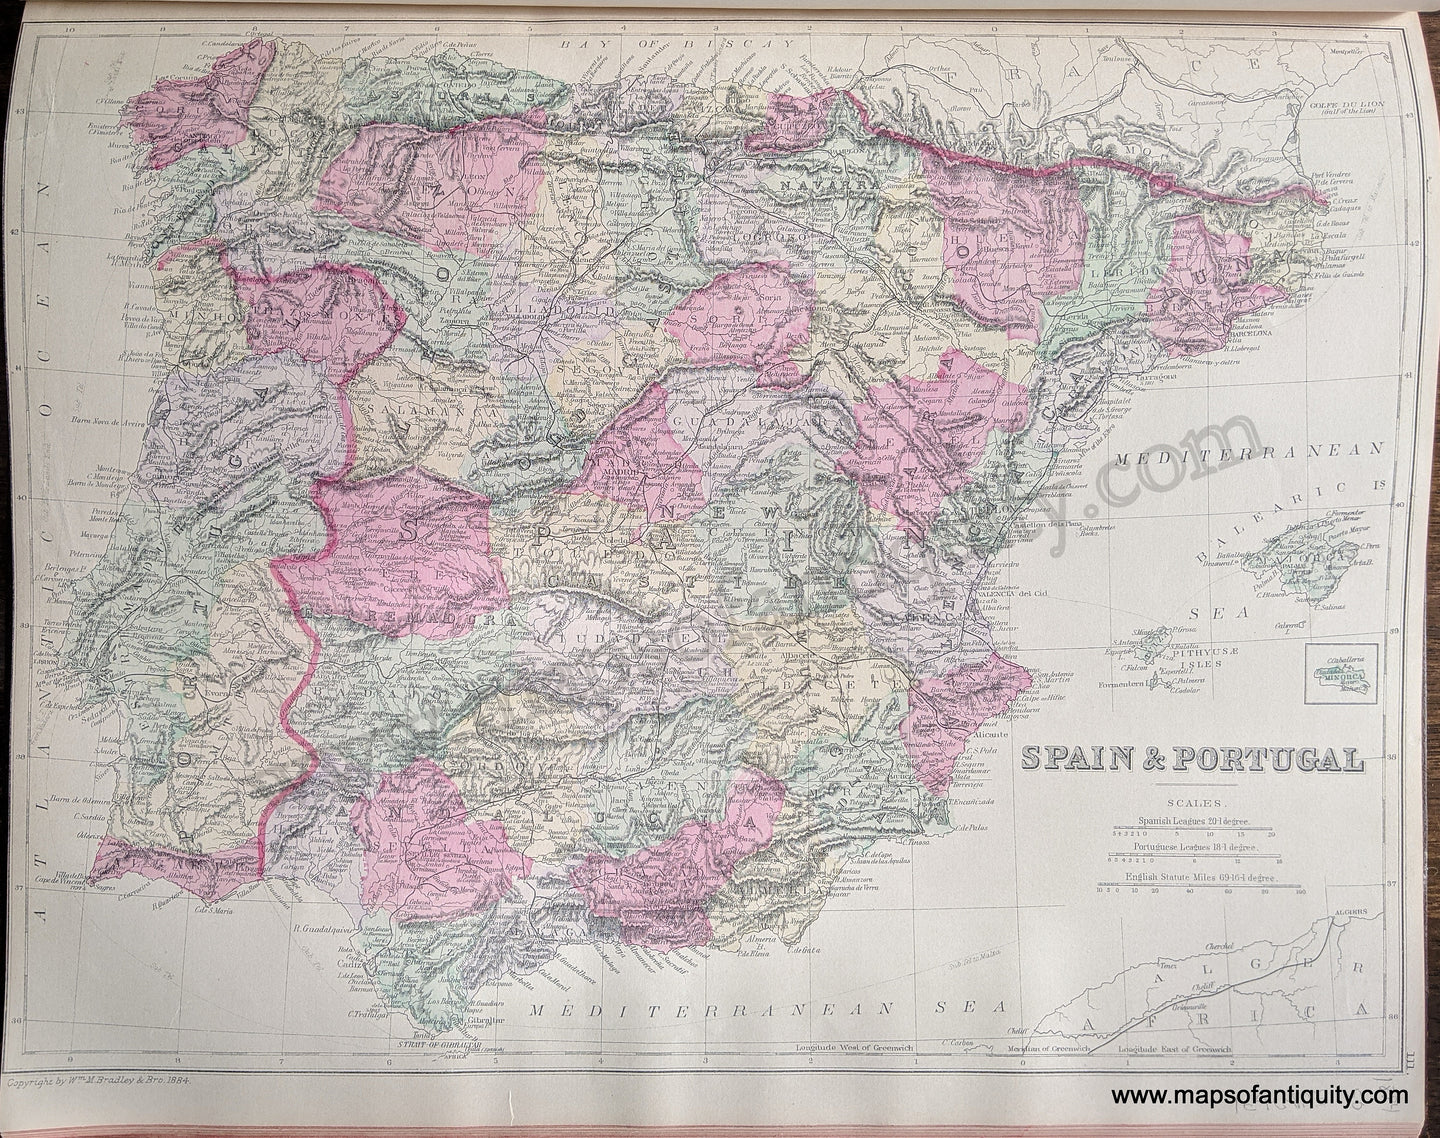 Antique-Hand-Colored-Map-Spain-&-Portugal-Europe-Spain-&-Portugal-1884-Mitchell-Maps-Of-Antiquity-1800s-19th-century